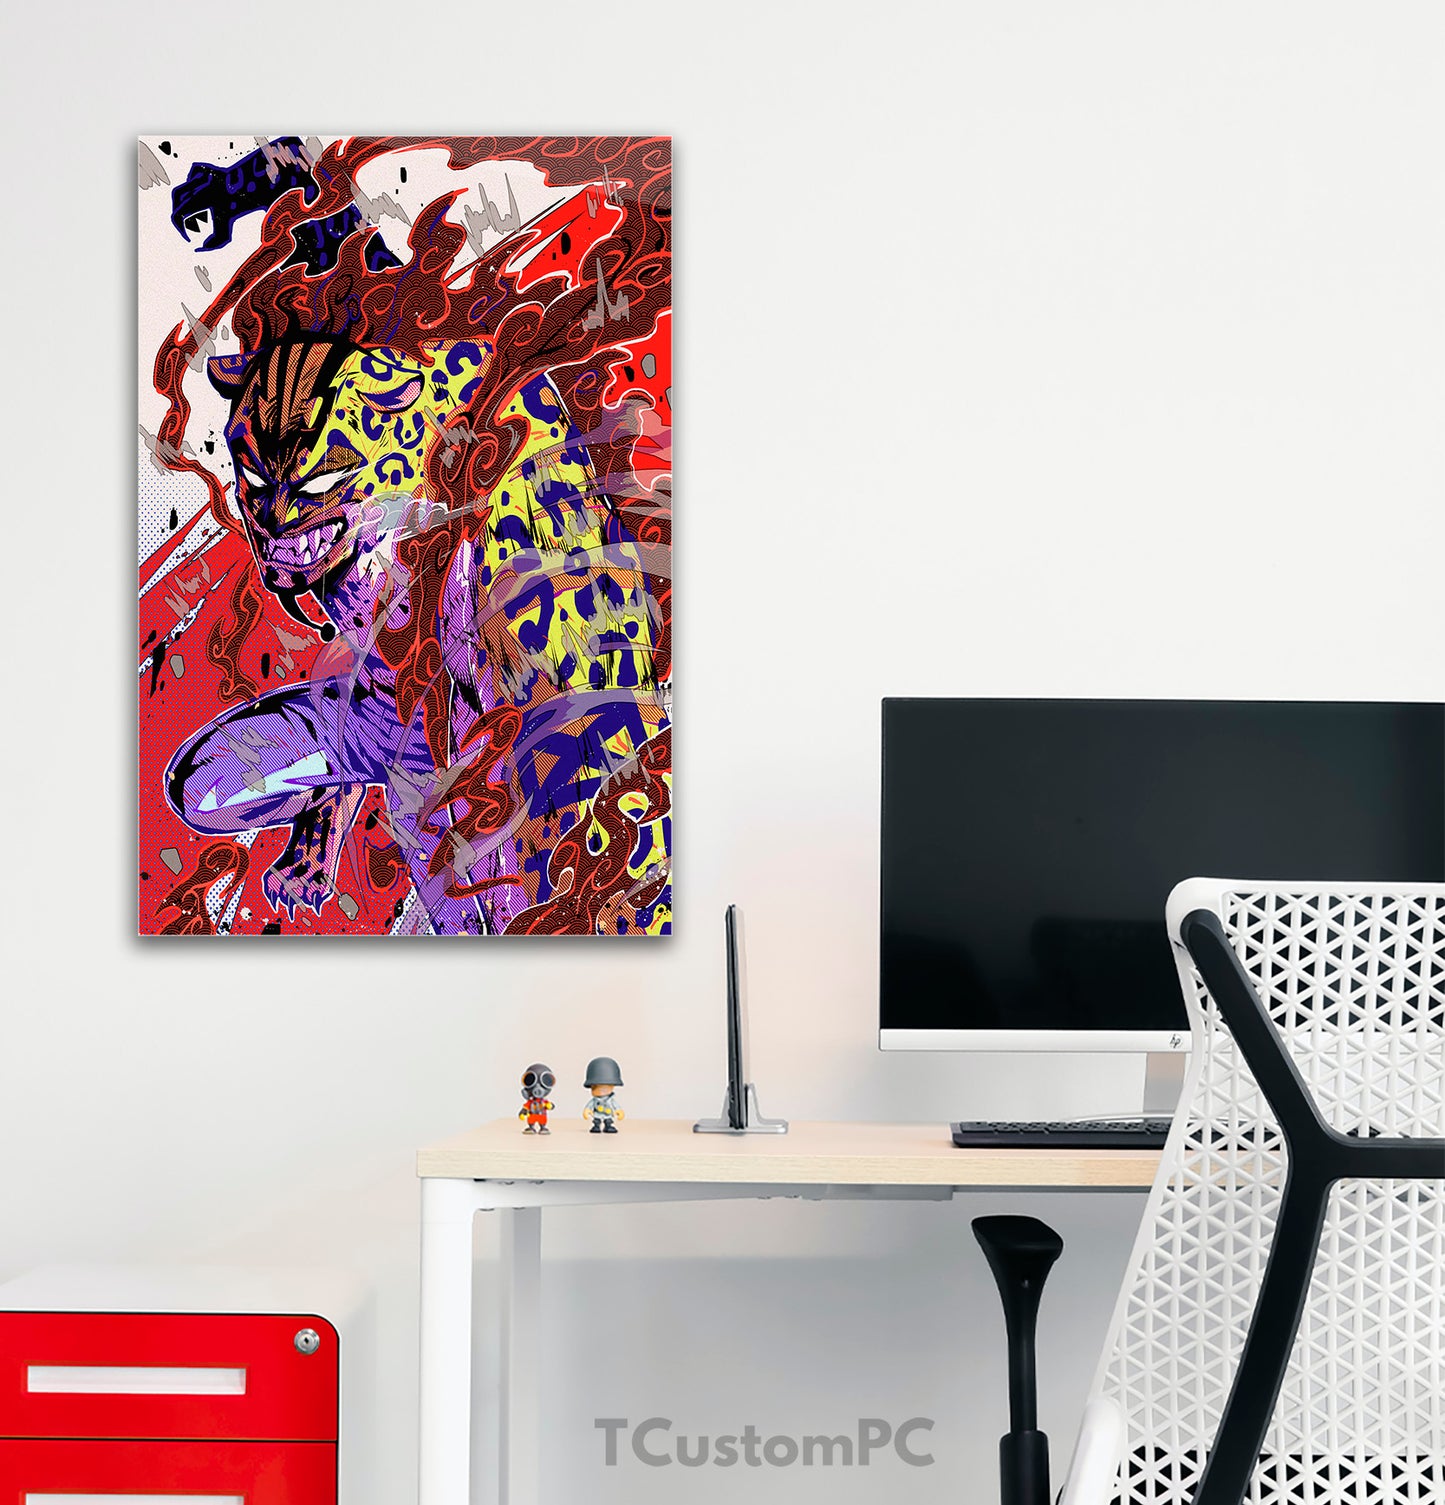 Rob Lucci One Piece Government Beast Painting